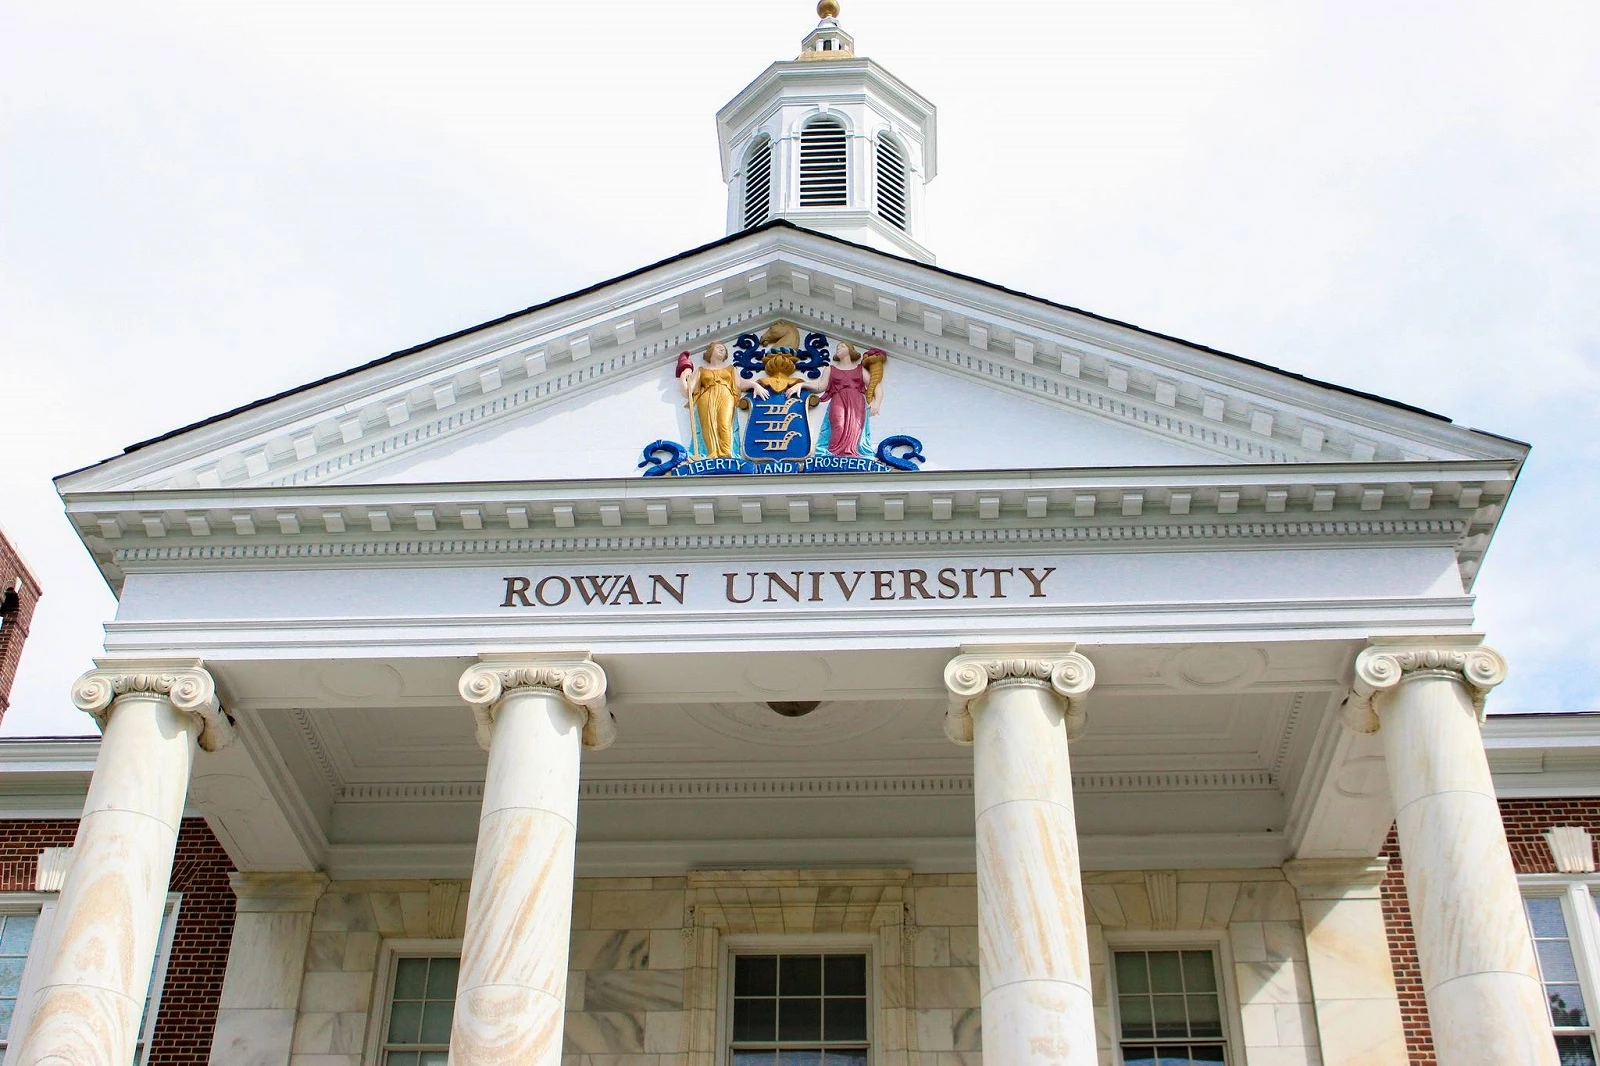 10 people have died at Rowan this year. Why school says it can't